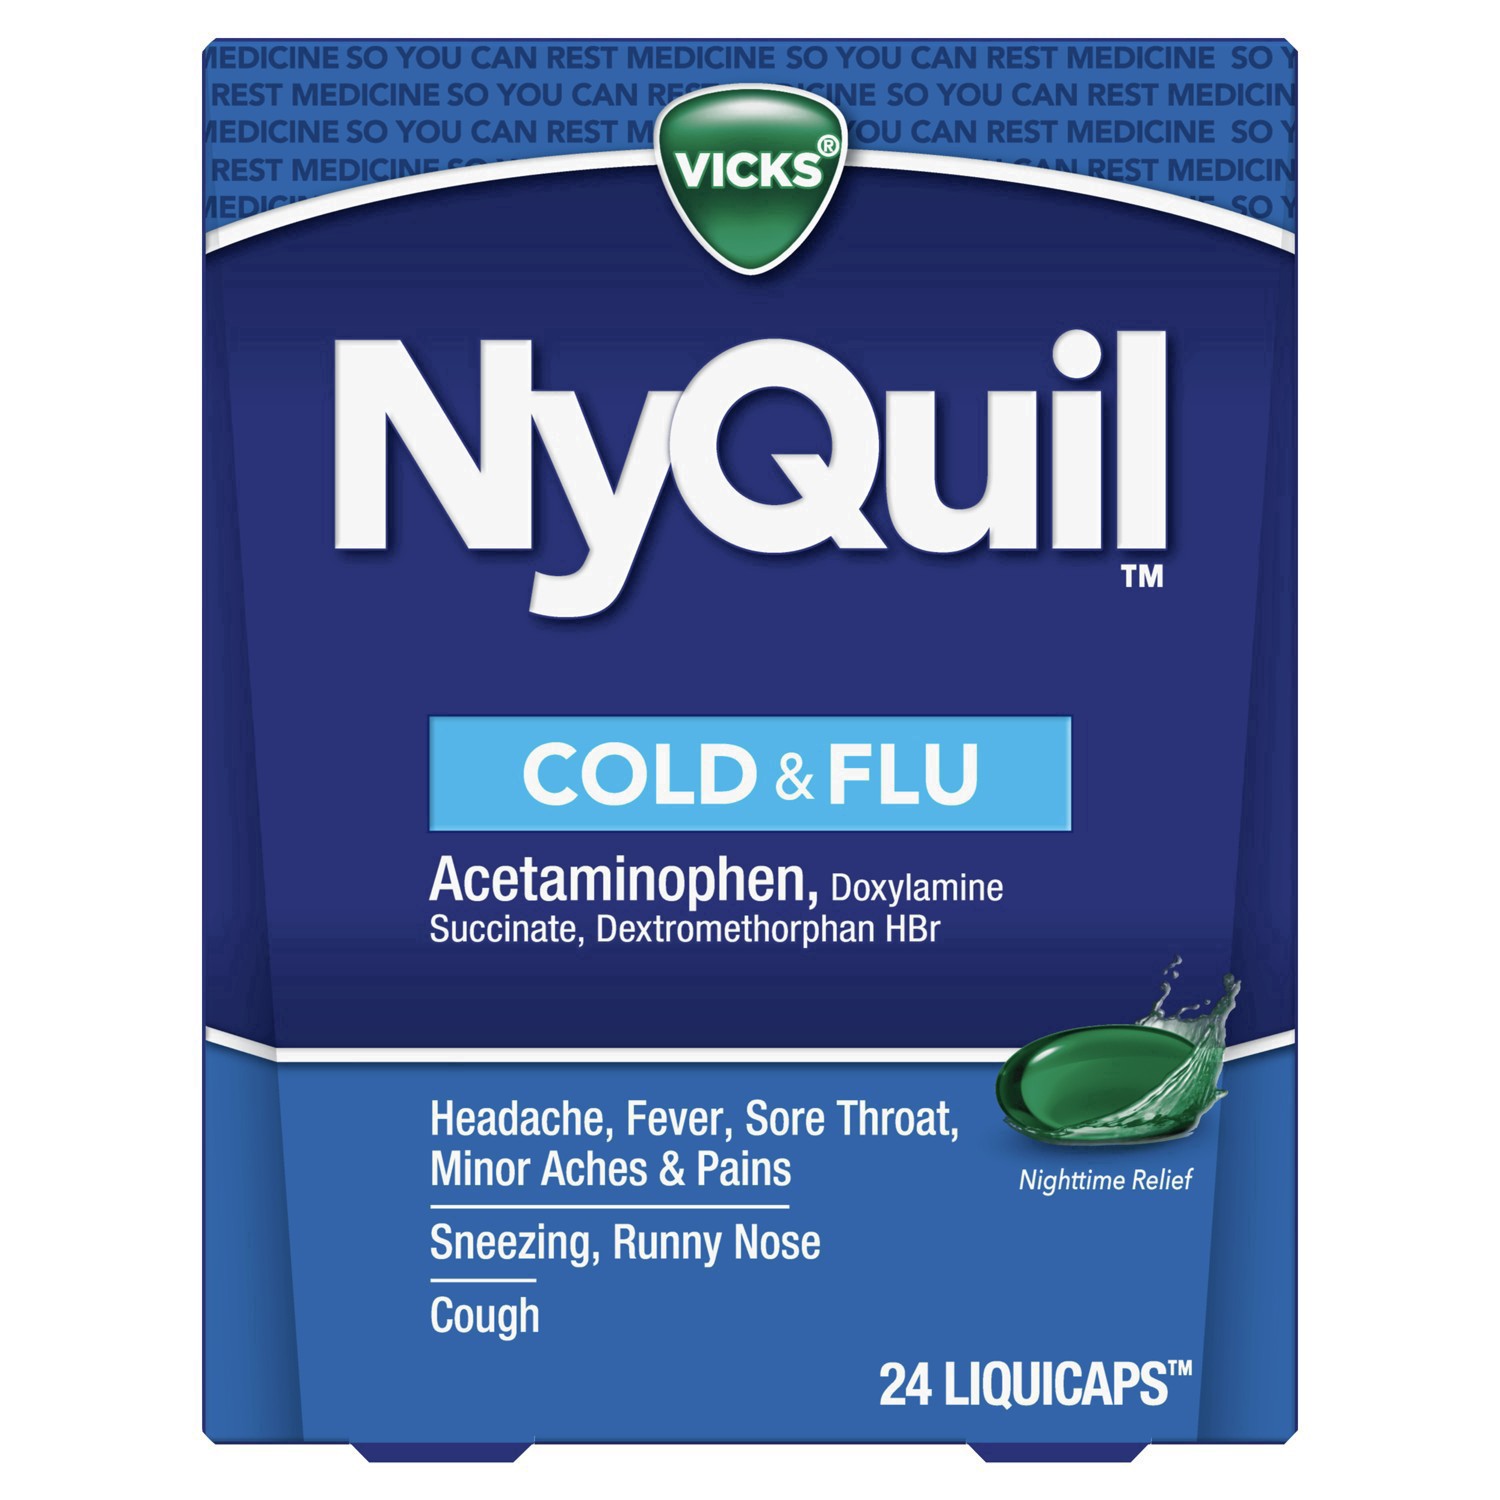 slide 47 of 68, NyQuil Vicks NyQuil Cold & Flu Medicine LiquiCaps - 24ct, 24 ct